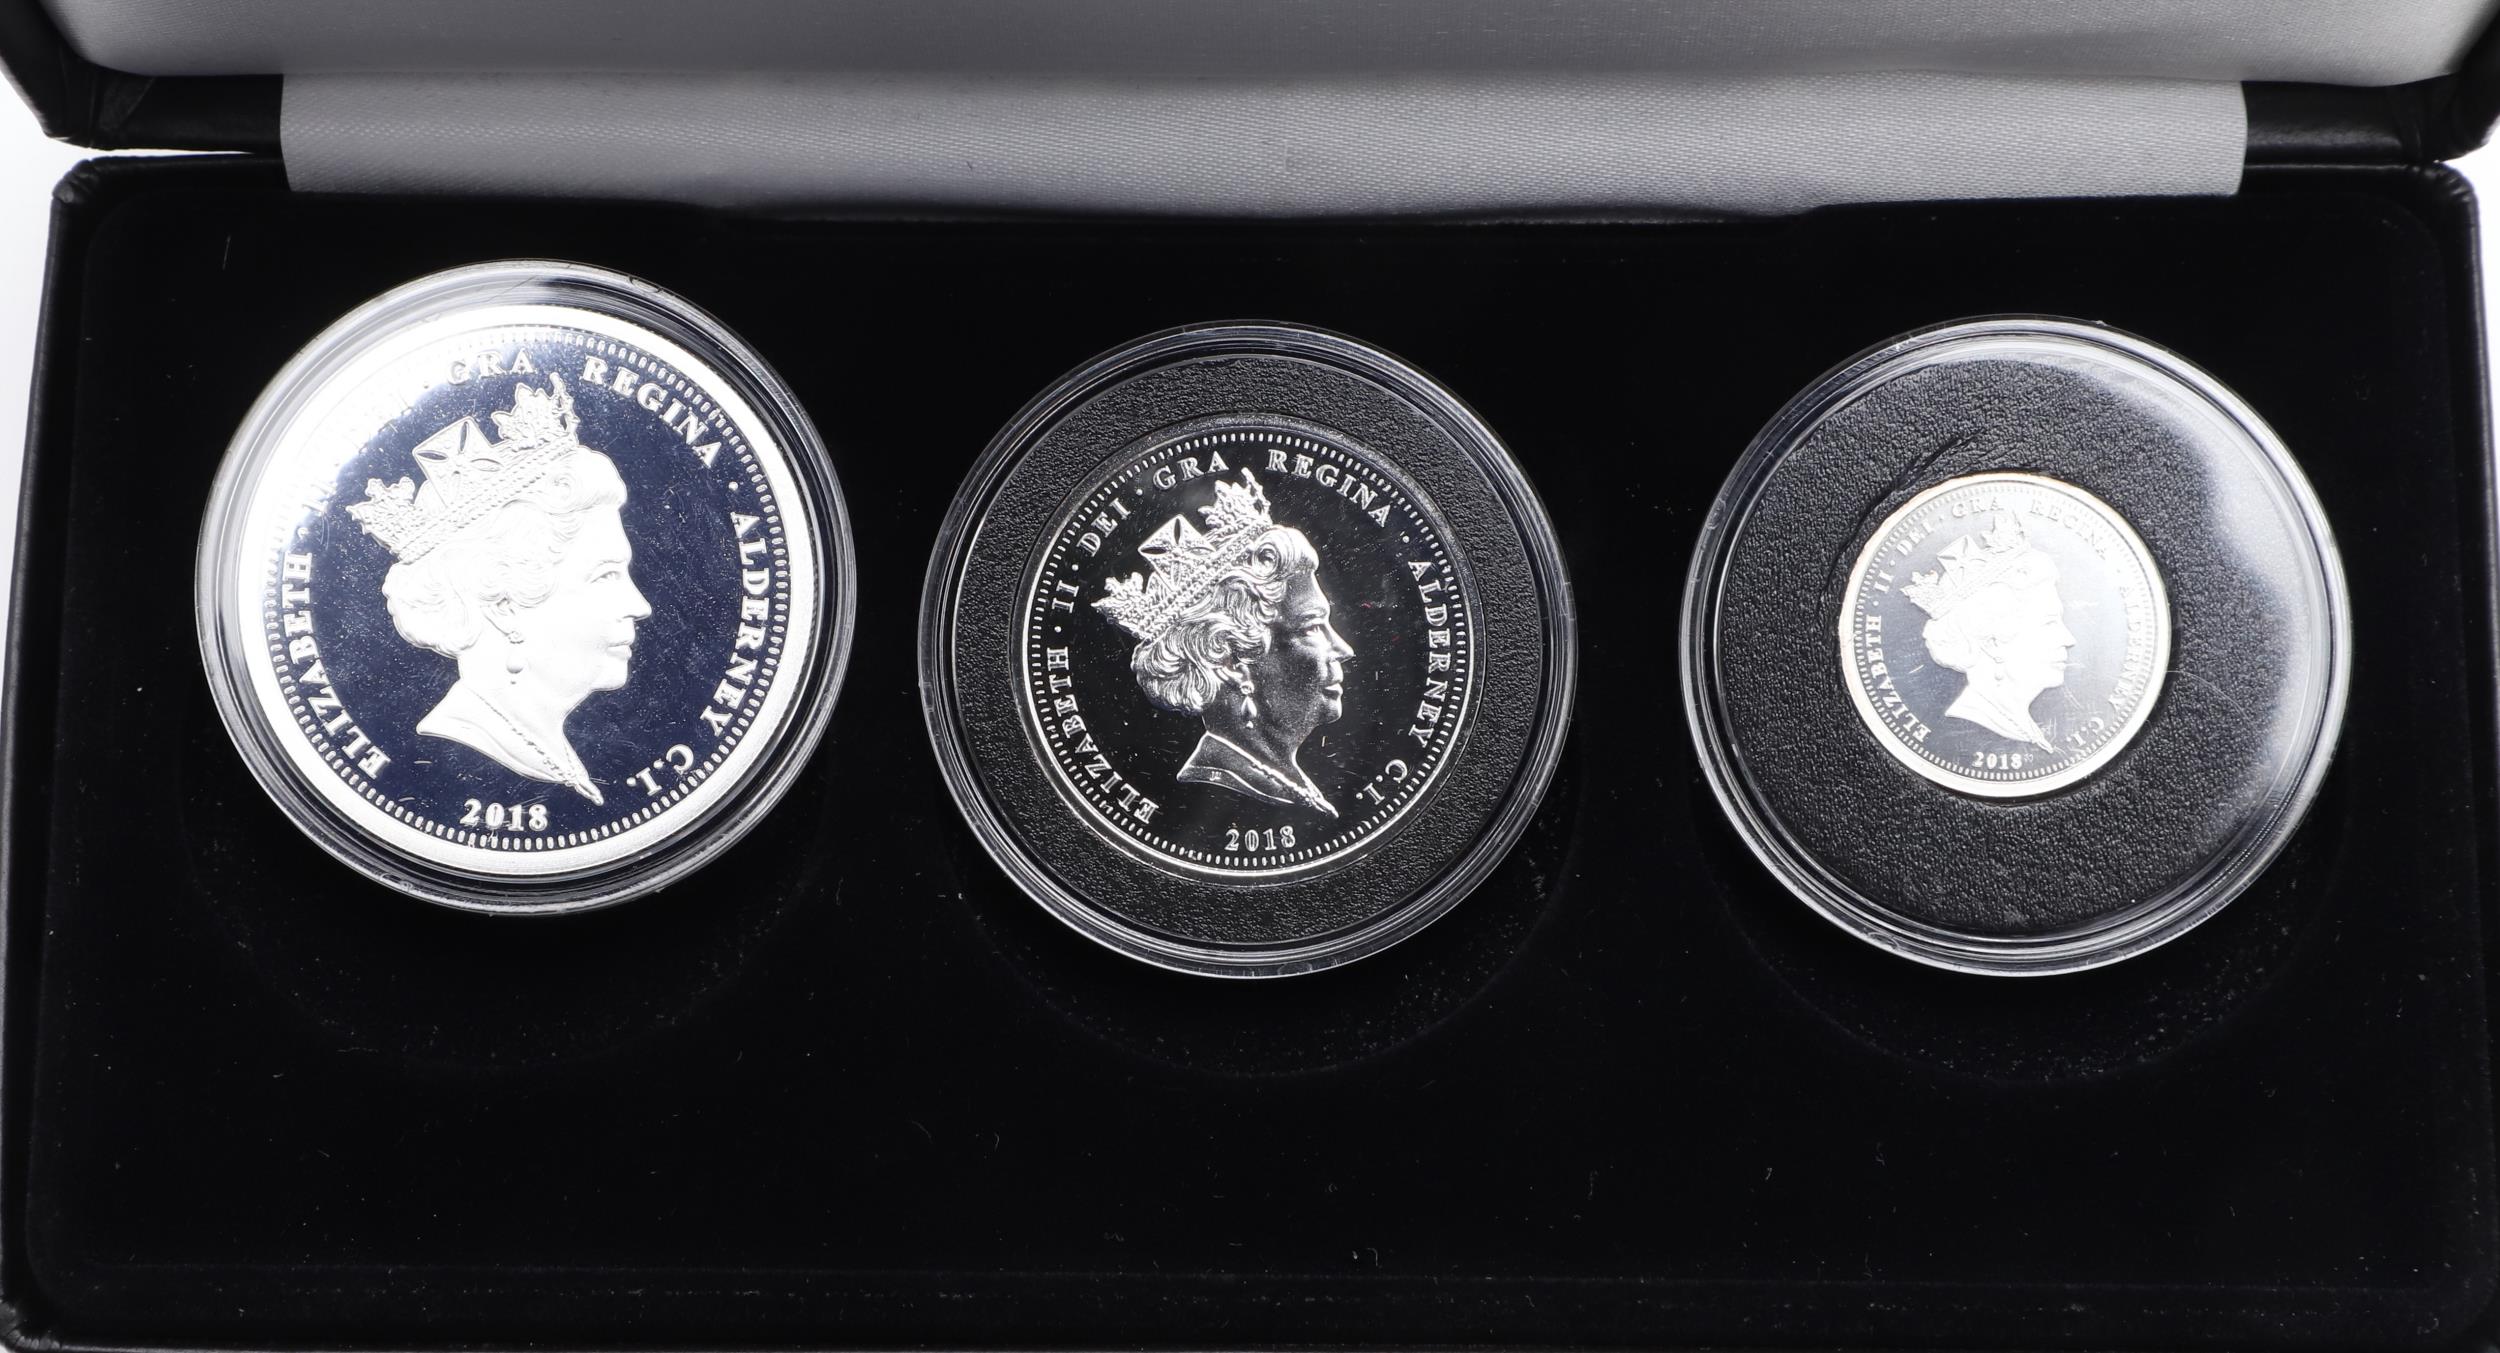 THREE JUBILEE MINT THREE COIN SILVER PROOF ROYALTY THEMED ISSUES, 2014, 2016 AND 2018. - Image 7 of 10